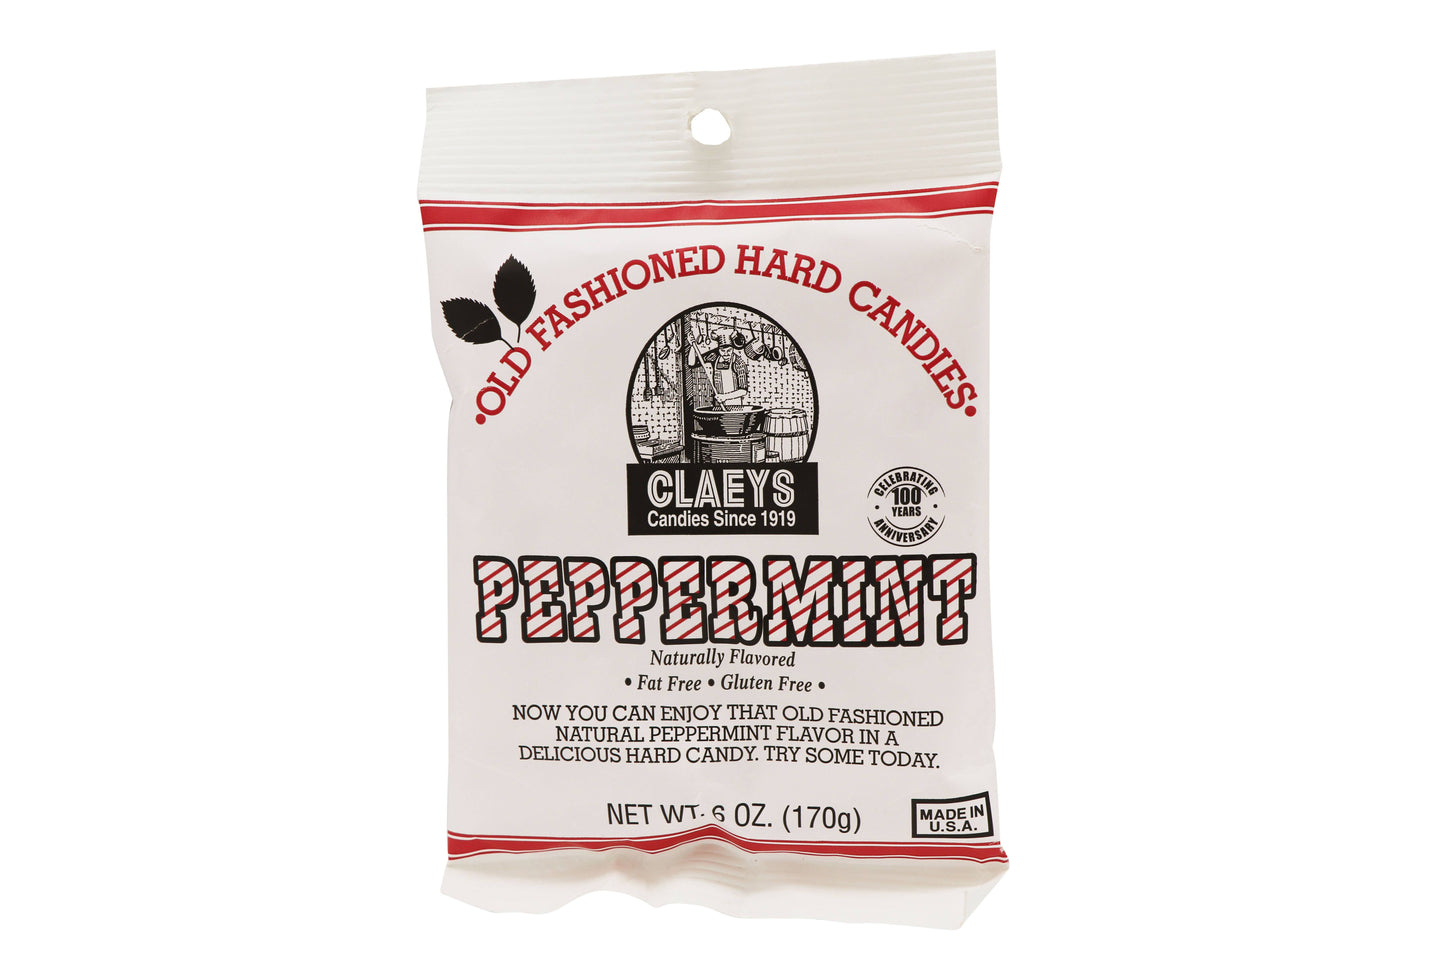 Claeys Old Fashioned Hard Candies Peppermint, 6oz Bag 24ct